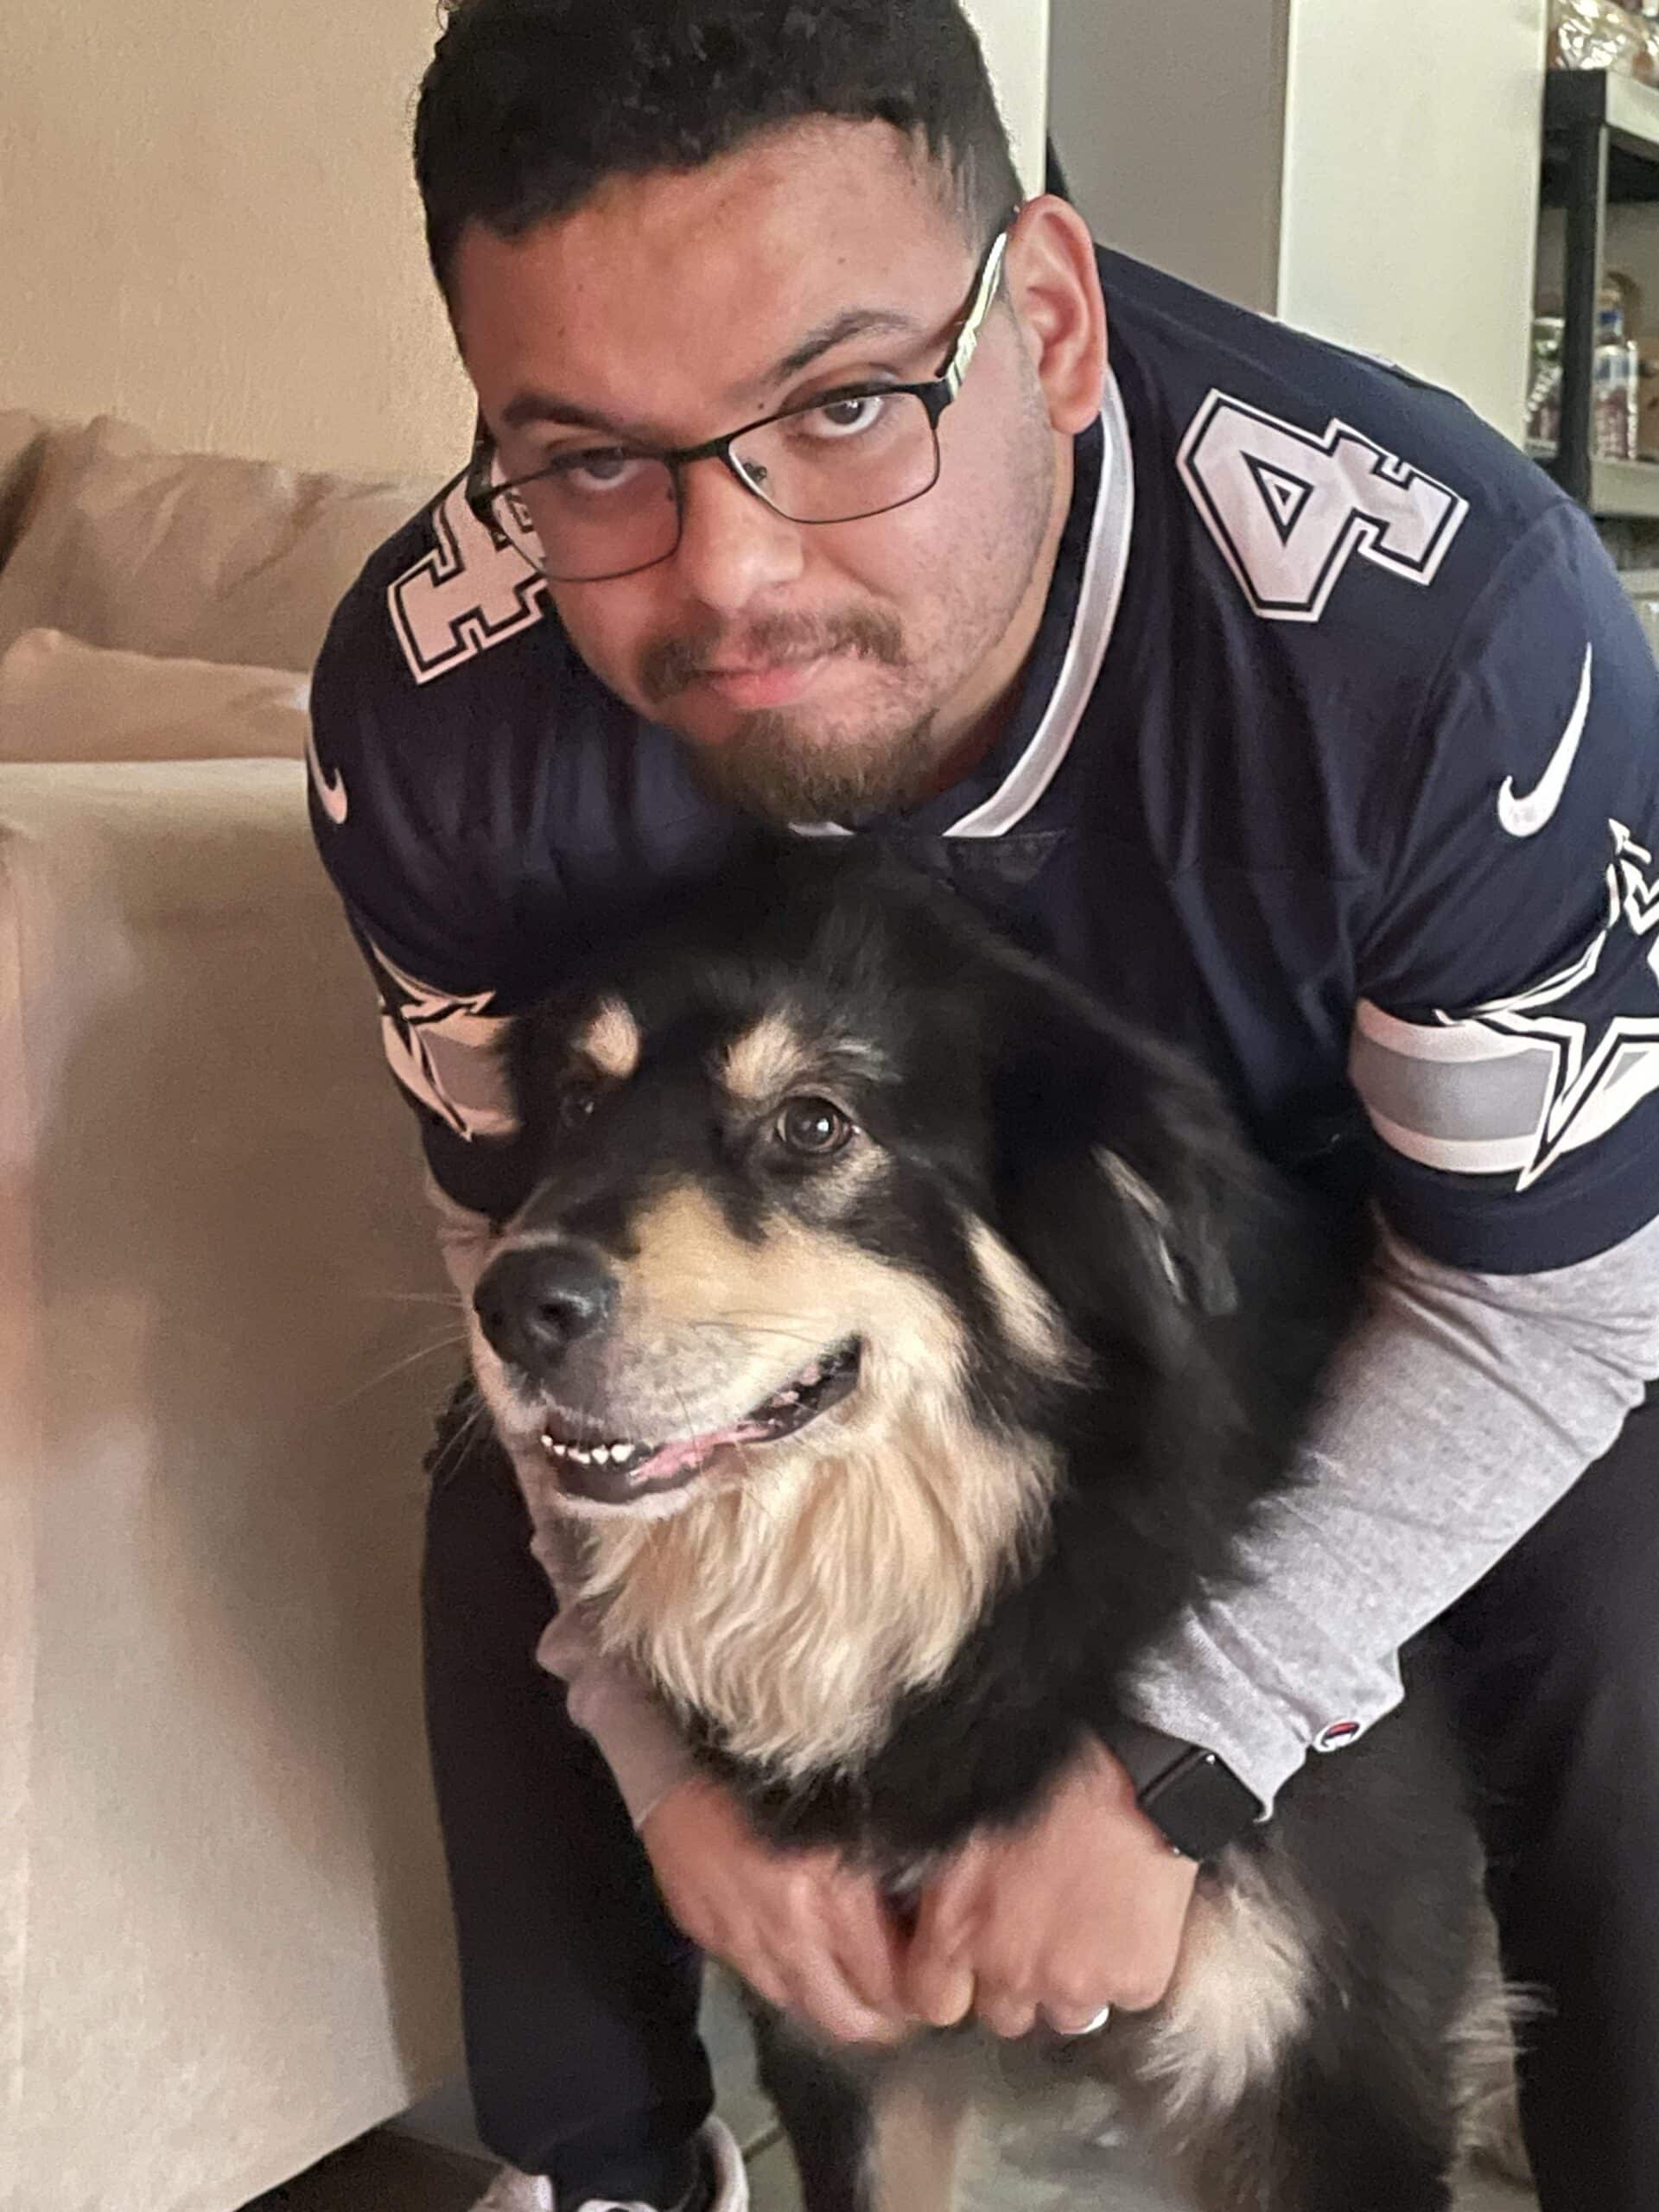 bryan acosta in his natural habitat in a dallas cowboys jersey with his dog Nero